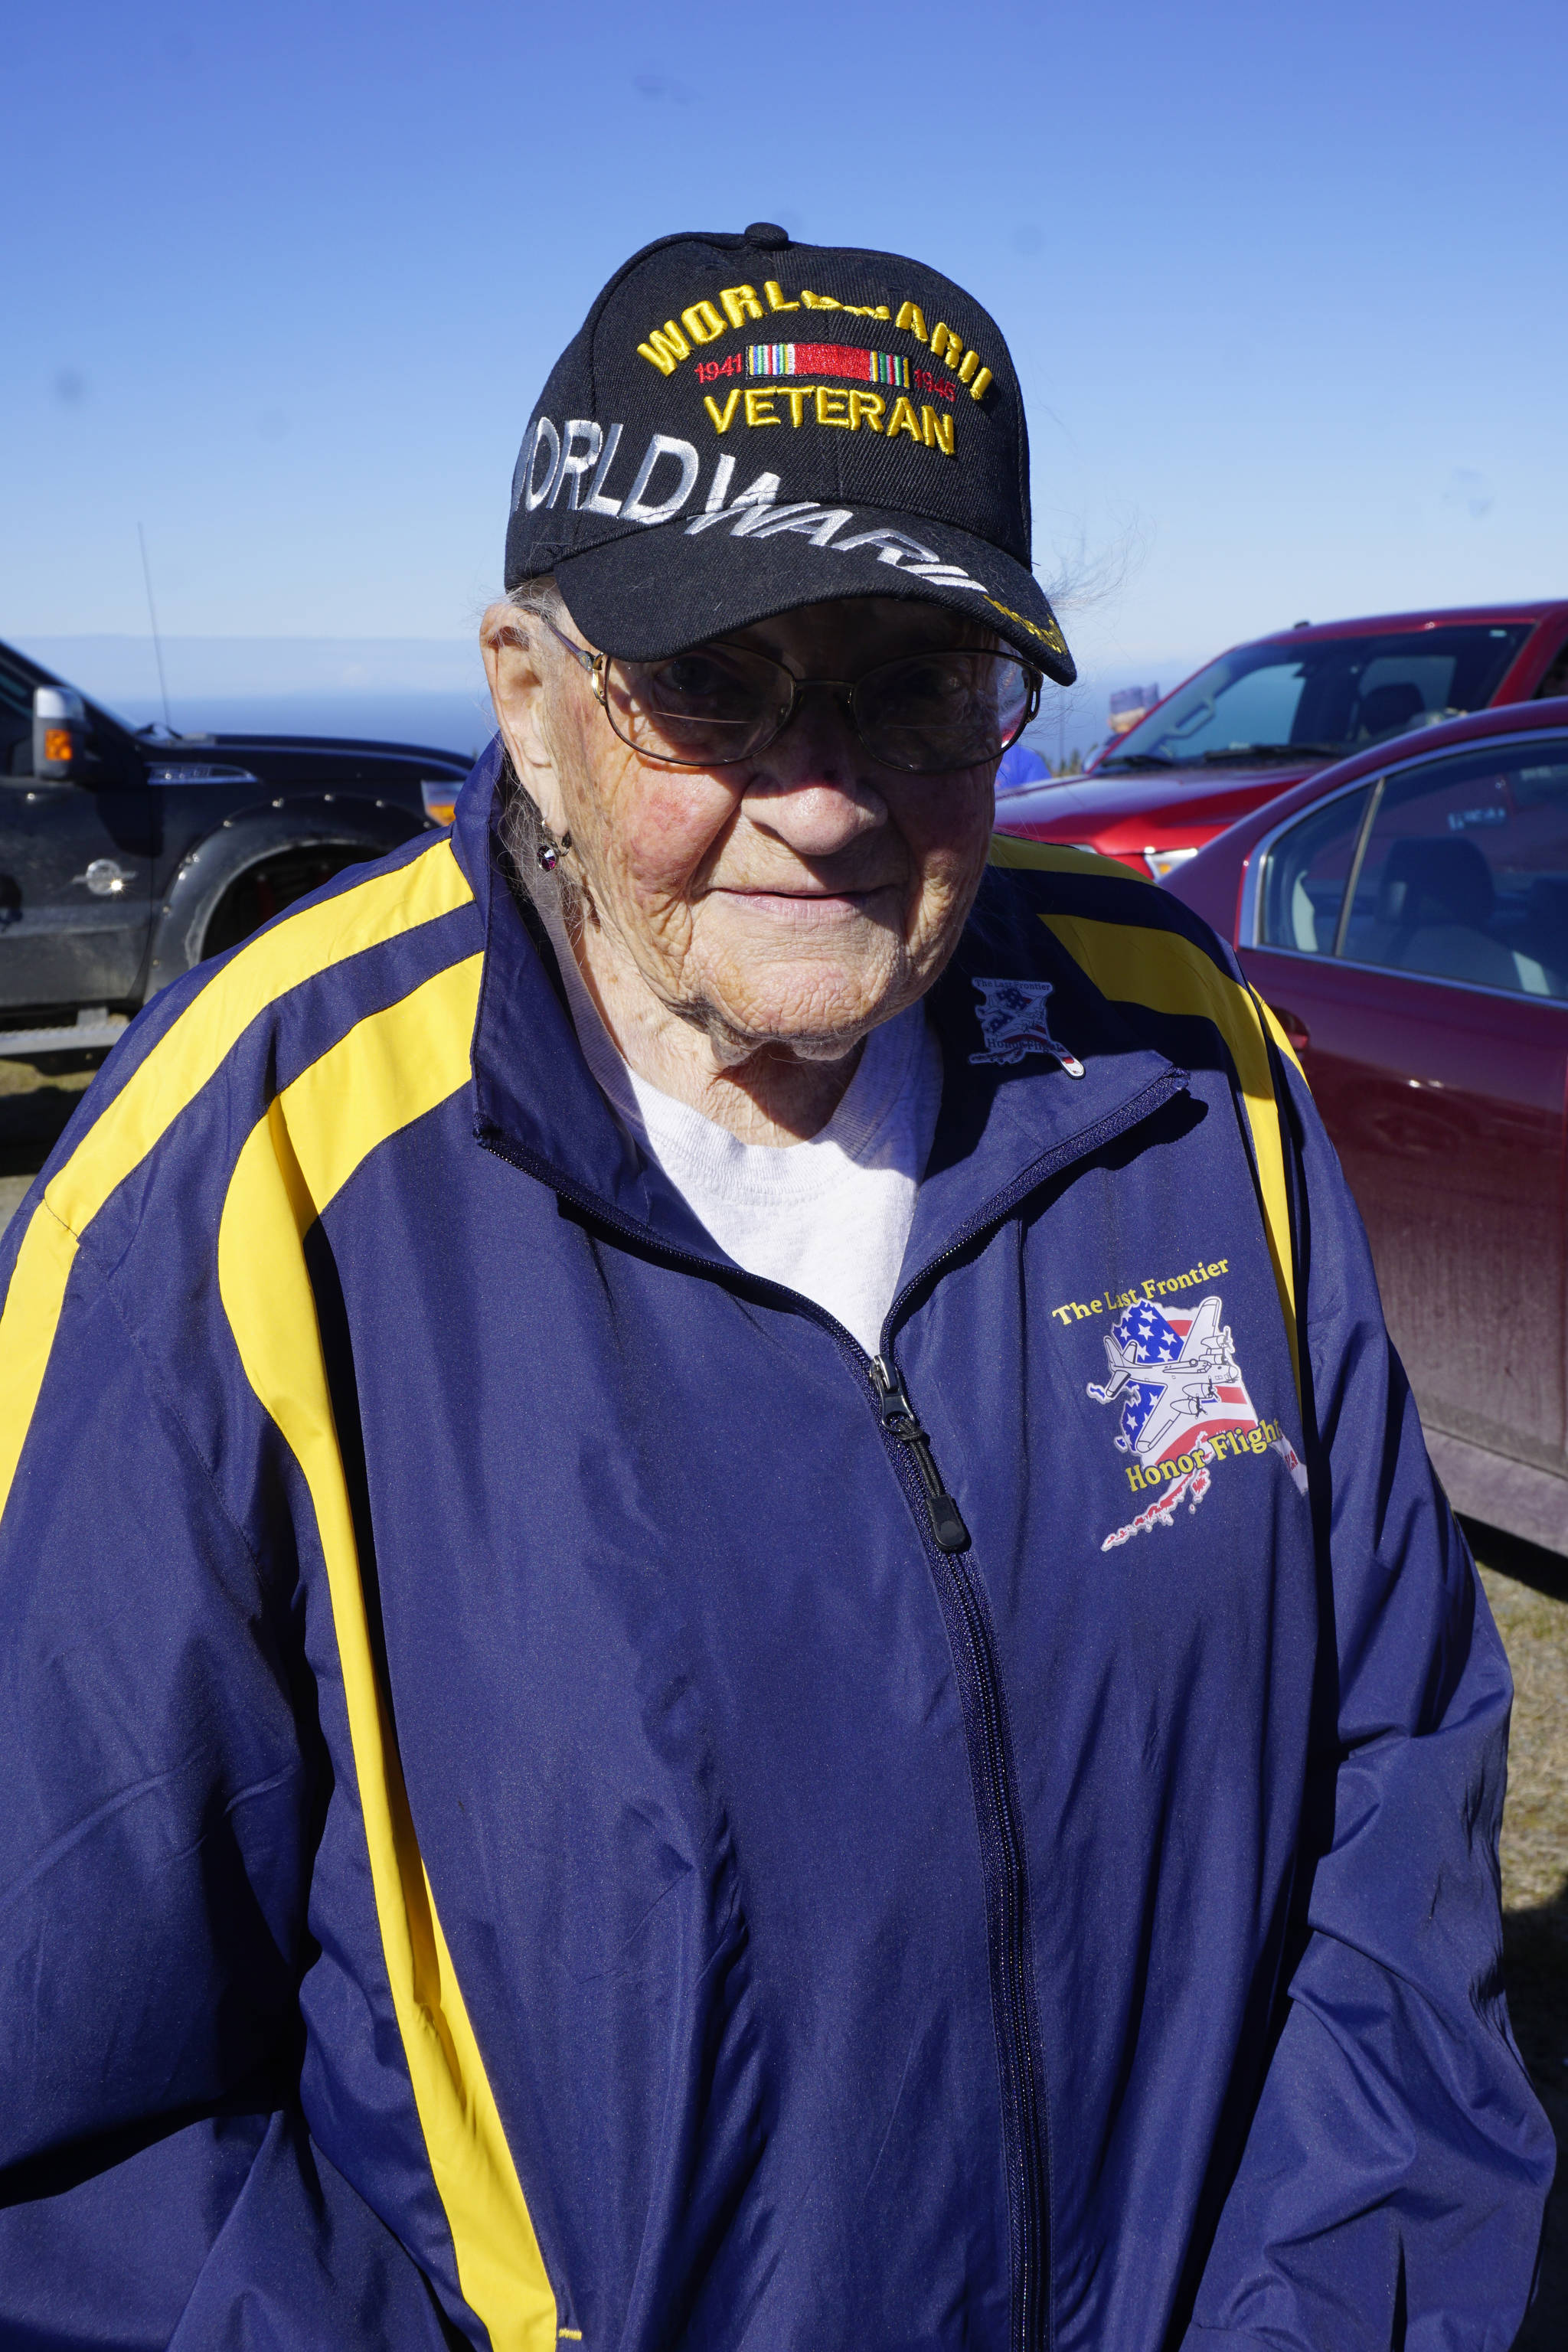 Dottie Holten attends Memorial Da ceremonies on May 28, 2018, at Hickerson Memorial Cemetery, Homer. Holten, 95, was in the U.S. Coast Guard. (Photo by Michael Armstrong / Homer News)